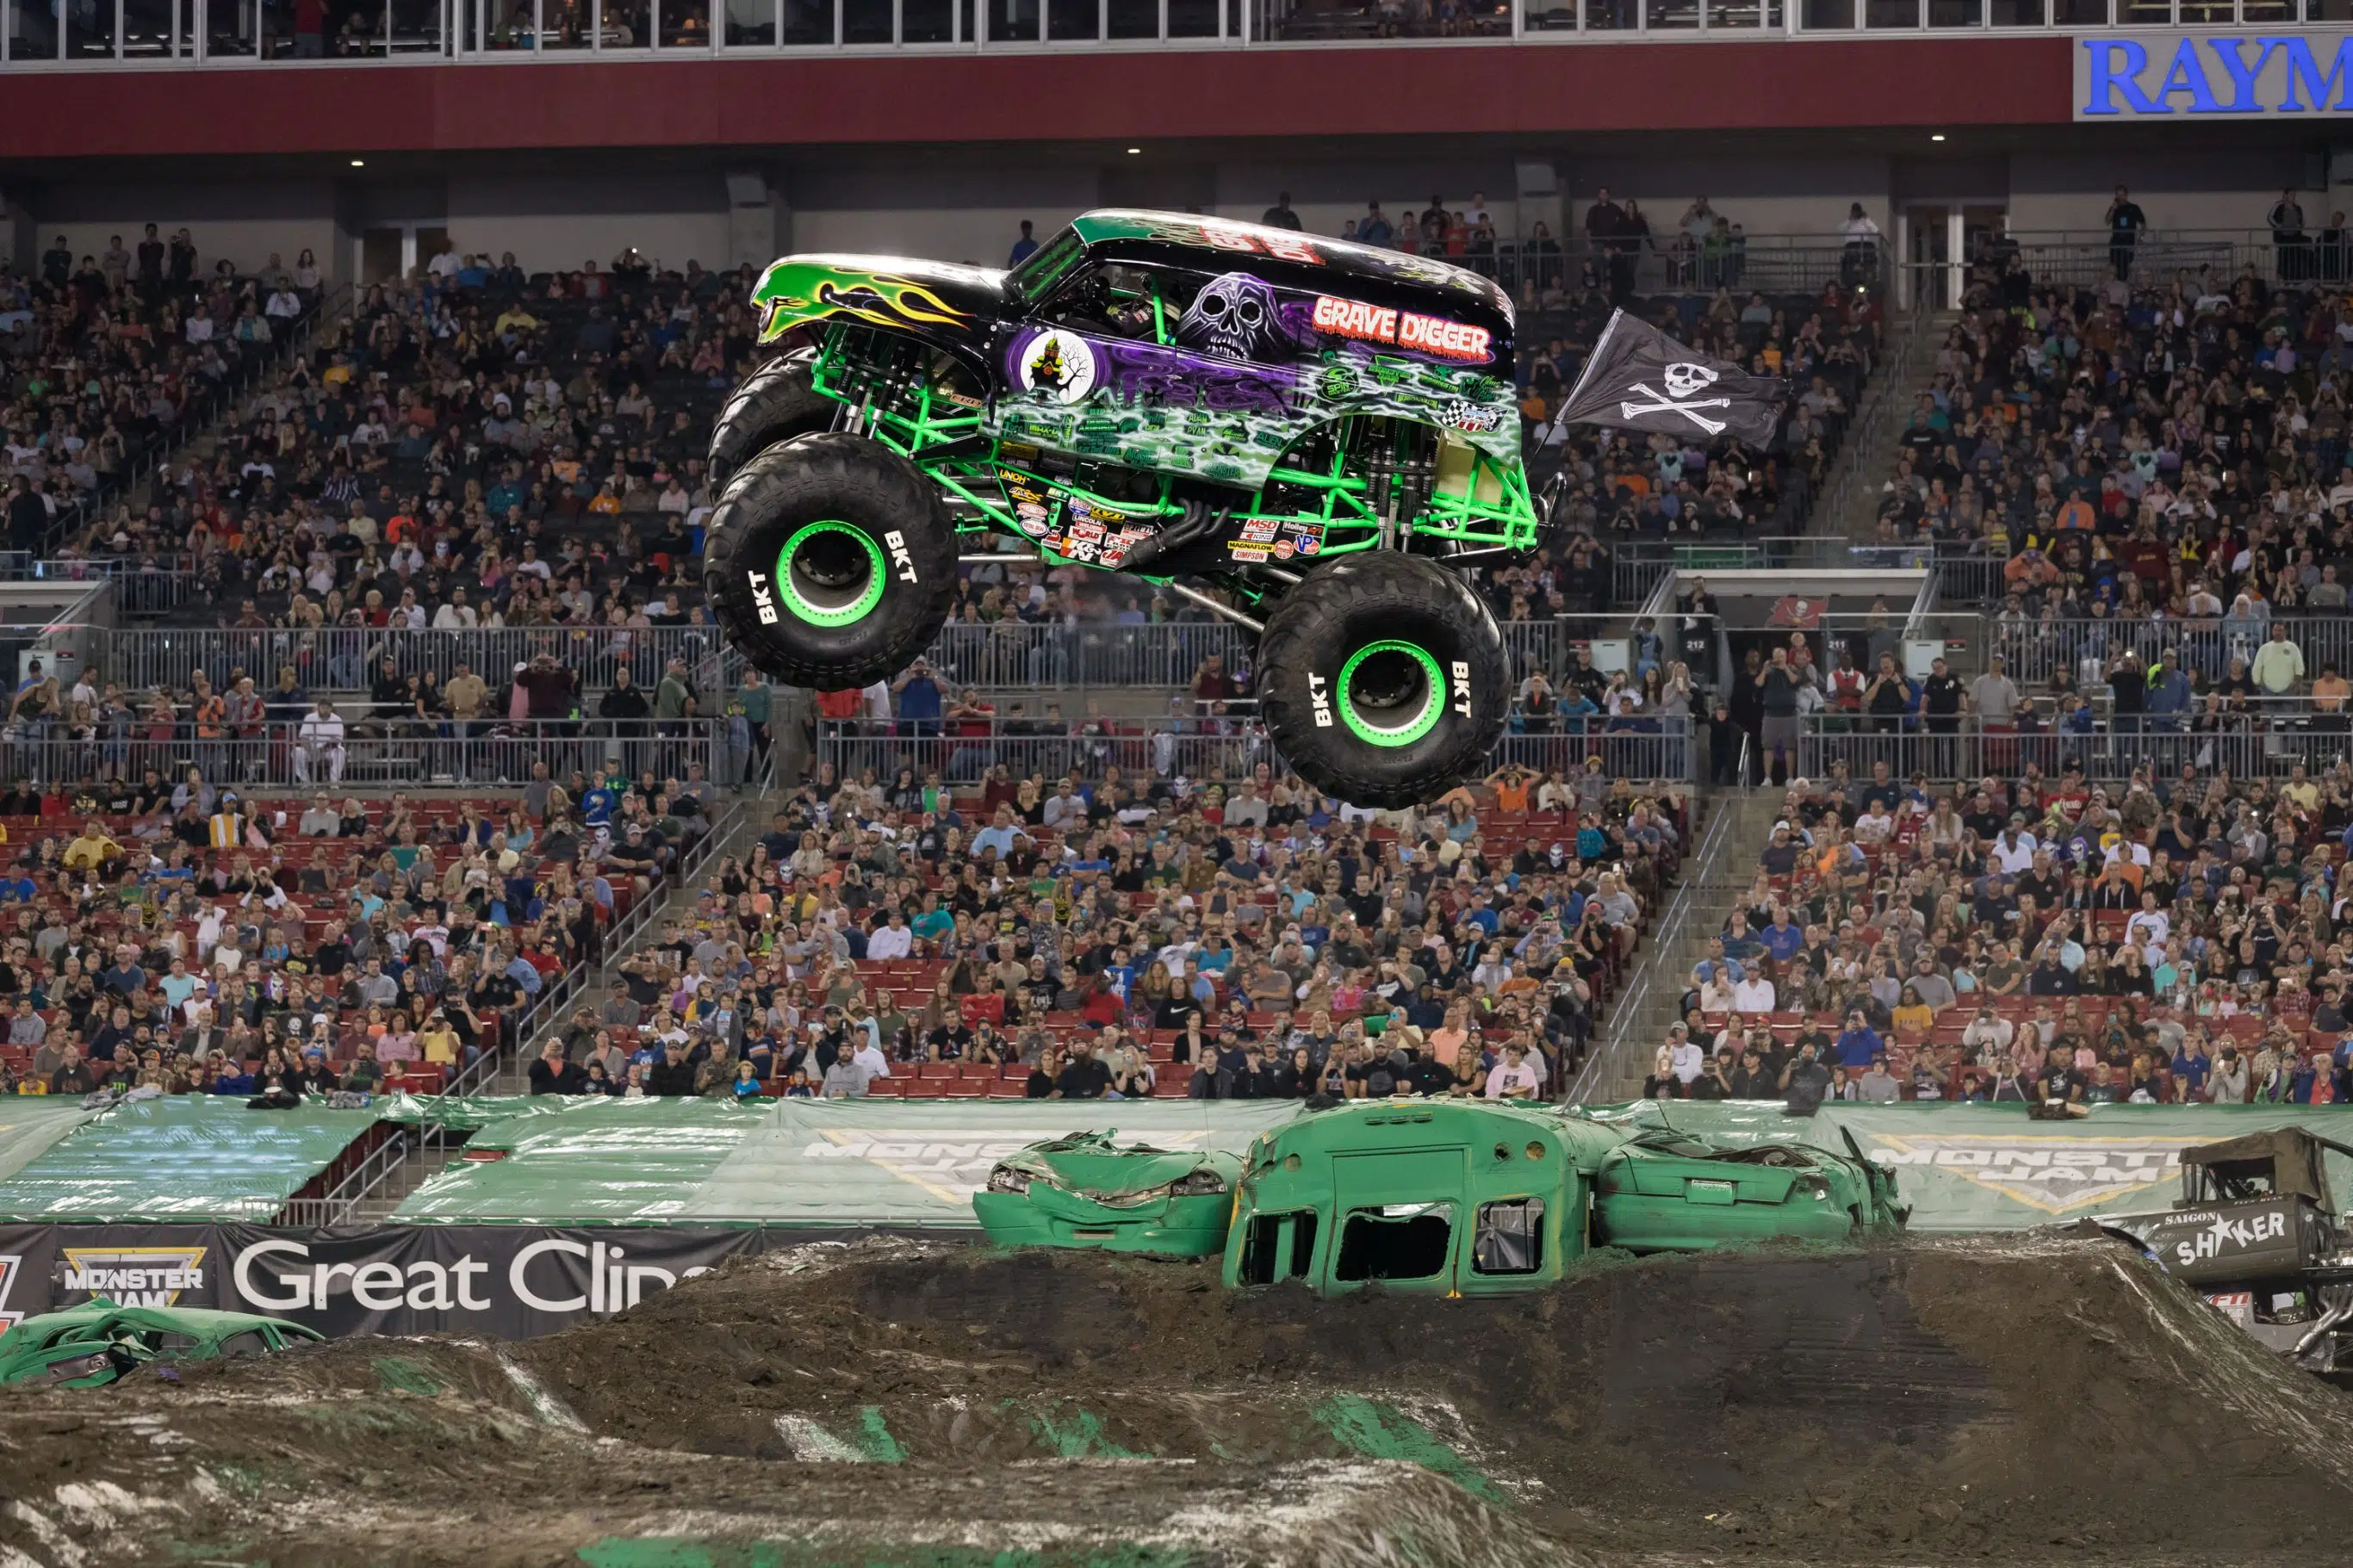 LISTEN: Monster Jam Returns To Vancouver - We Chat With The Driver of Grave Digger